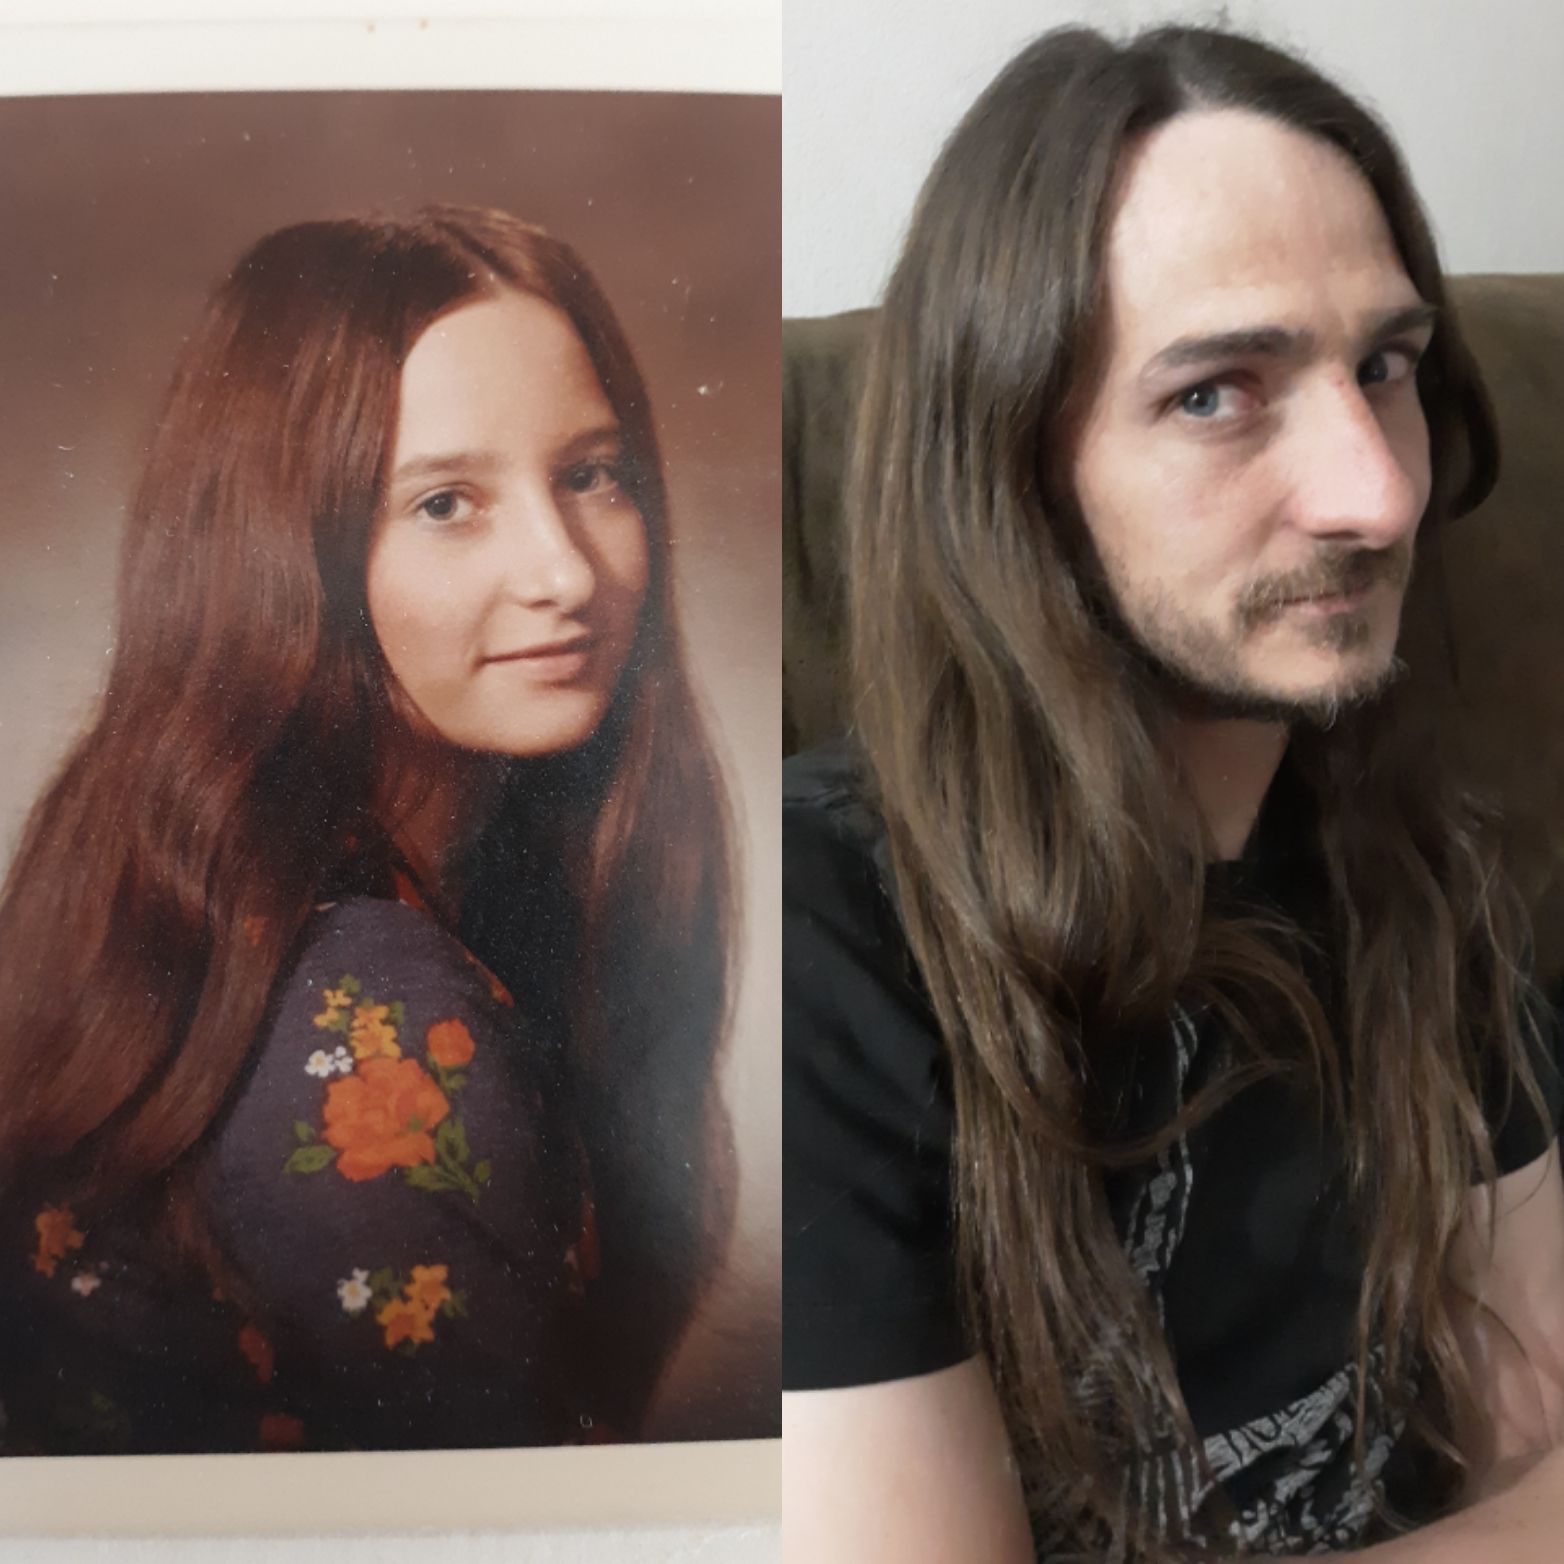 My husband always said he looks more like his dad when he was young, and not his mom. I finally got to prove him wrong.